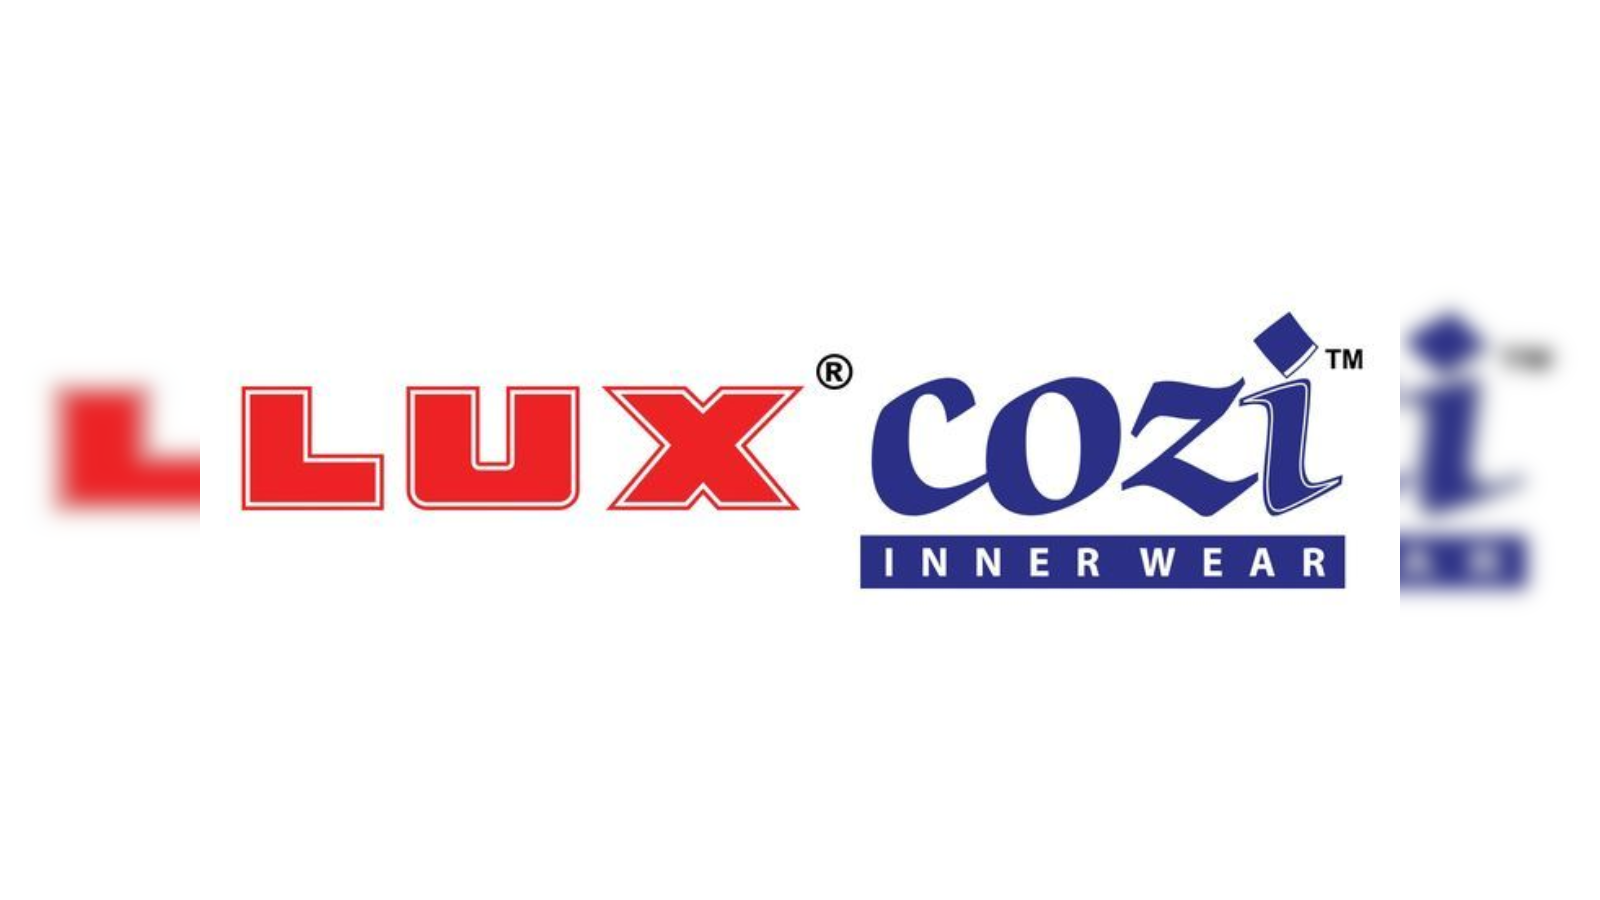 Lux Cozi: Latest News, Photos, Videos, Information on Lux Cozi